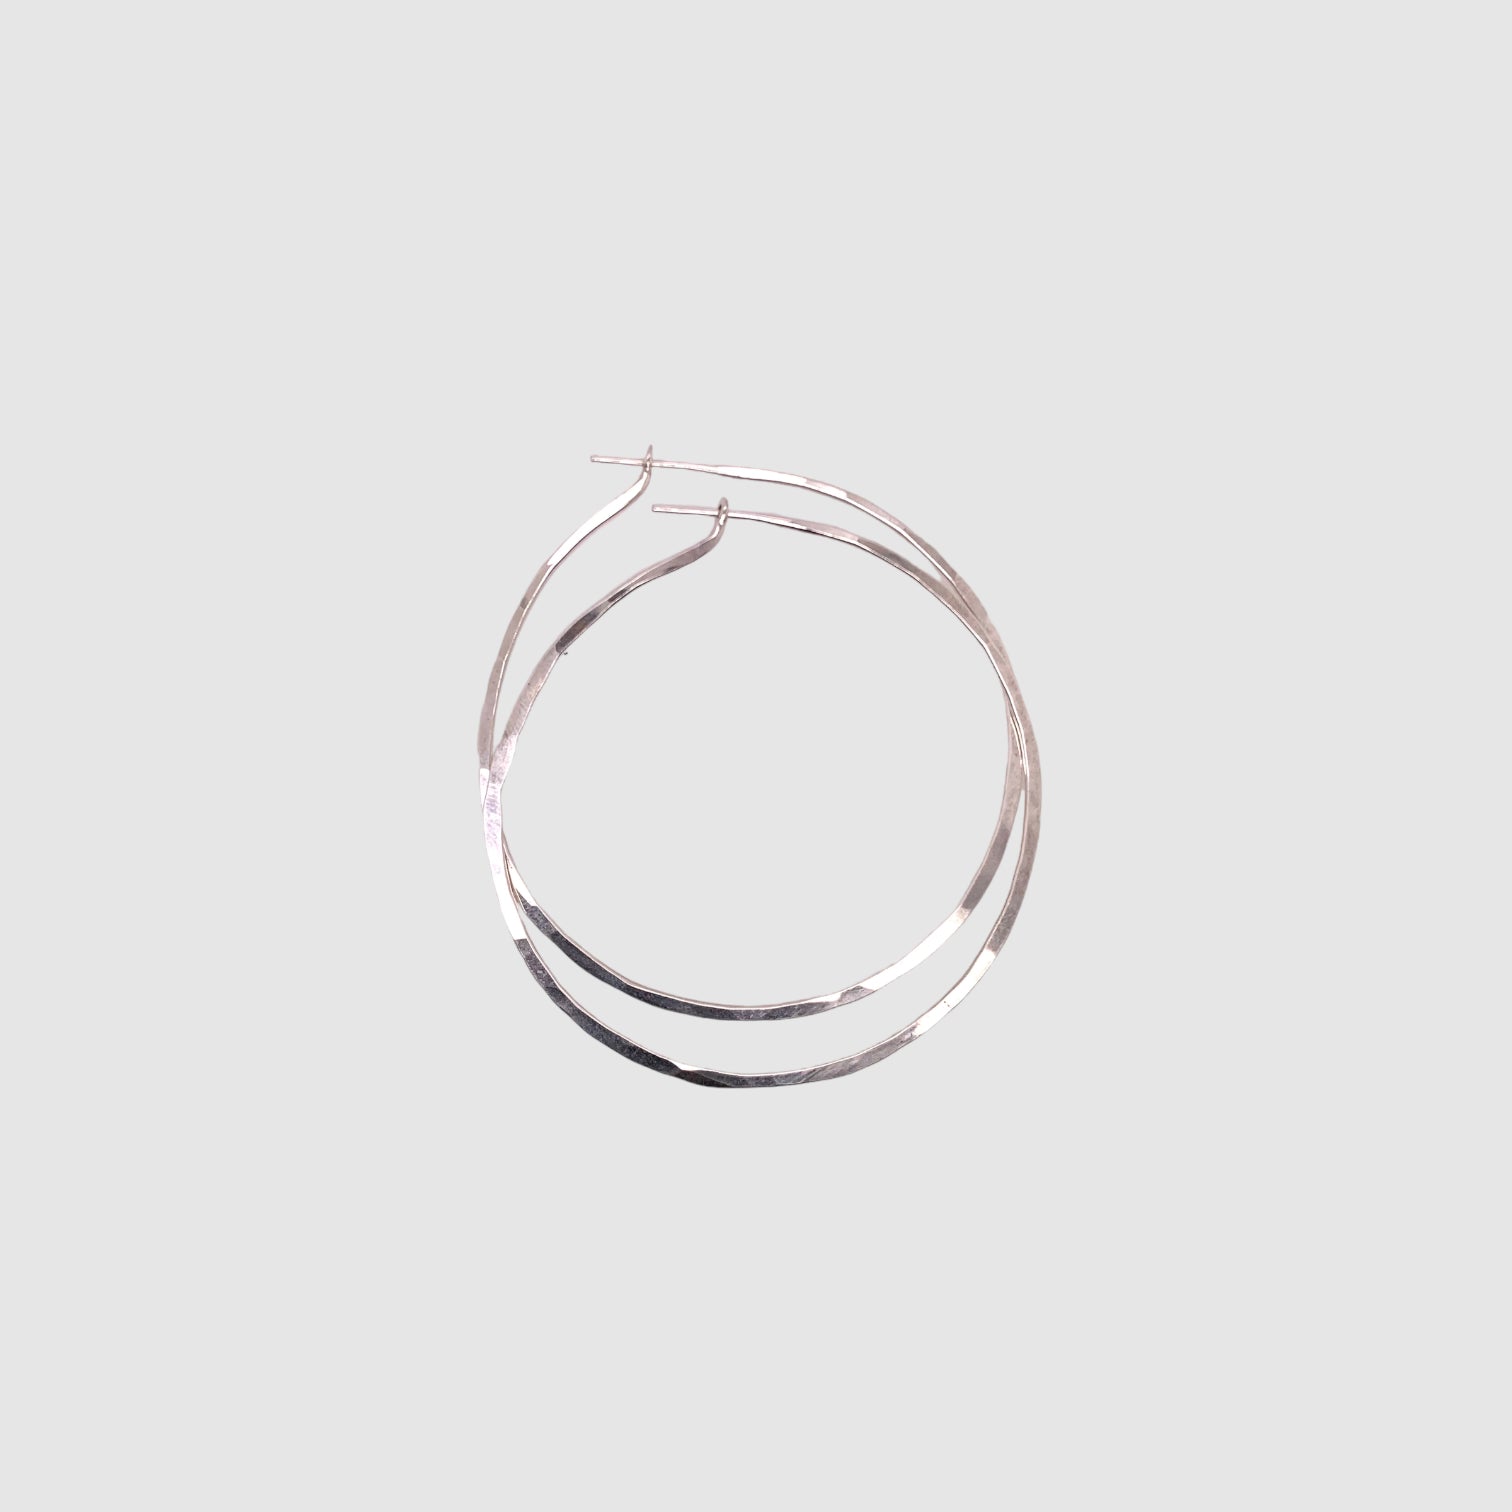 HOOPS // XL // ROUND // SILVER